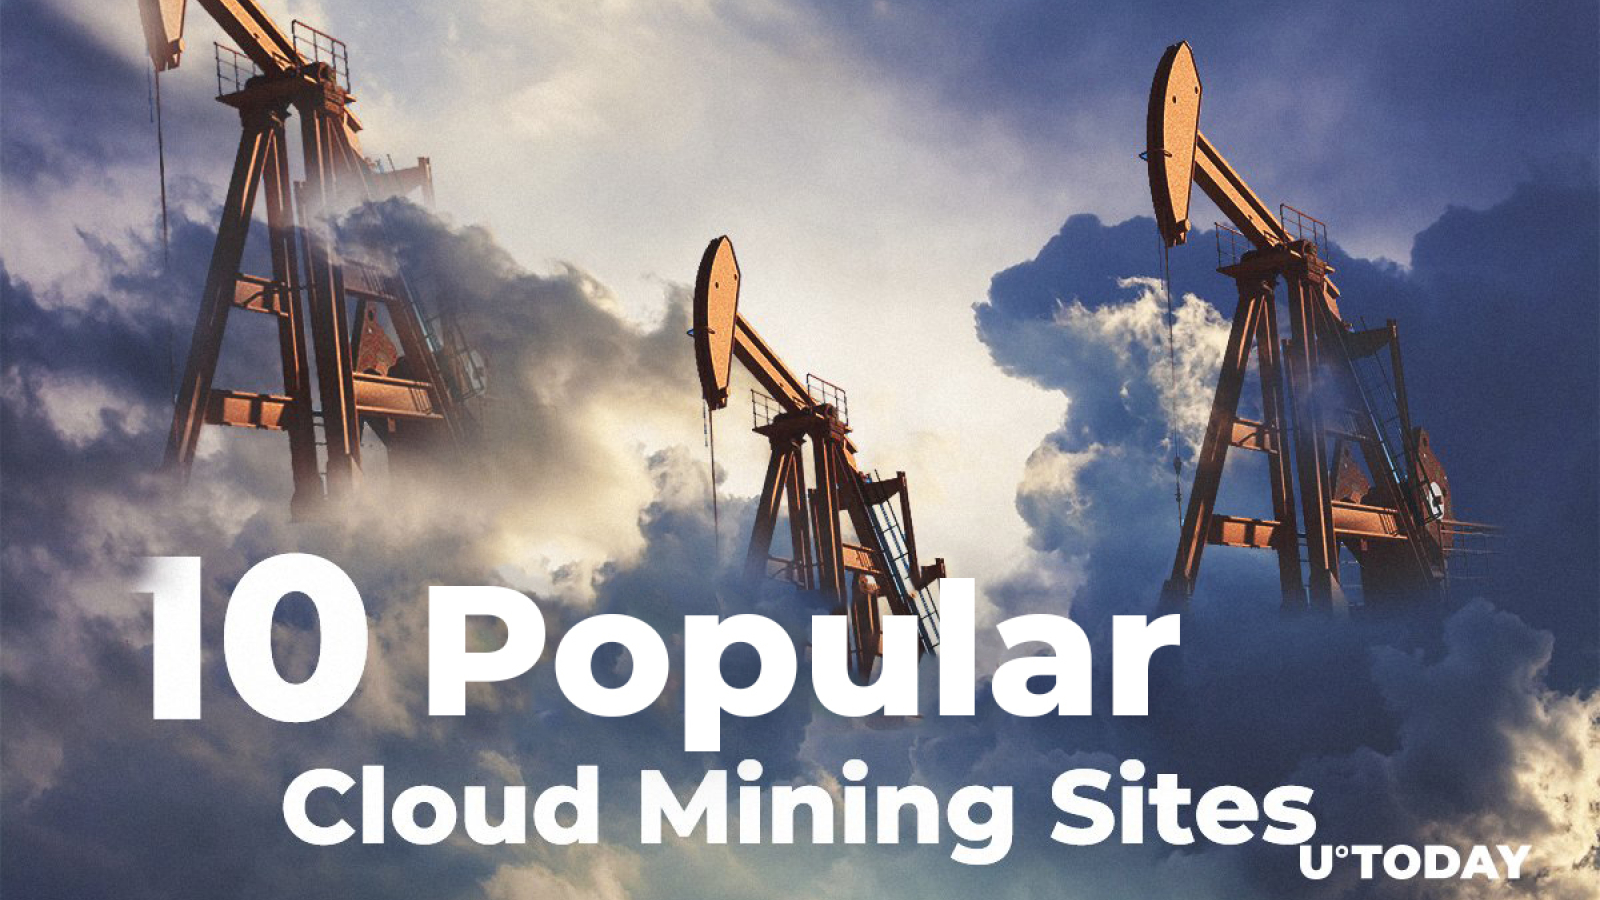 10 Popular Cloud Mining Sites In 2019 Updated Images, Photos, Reviews